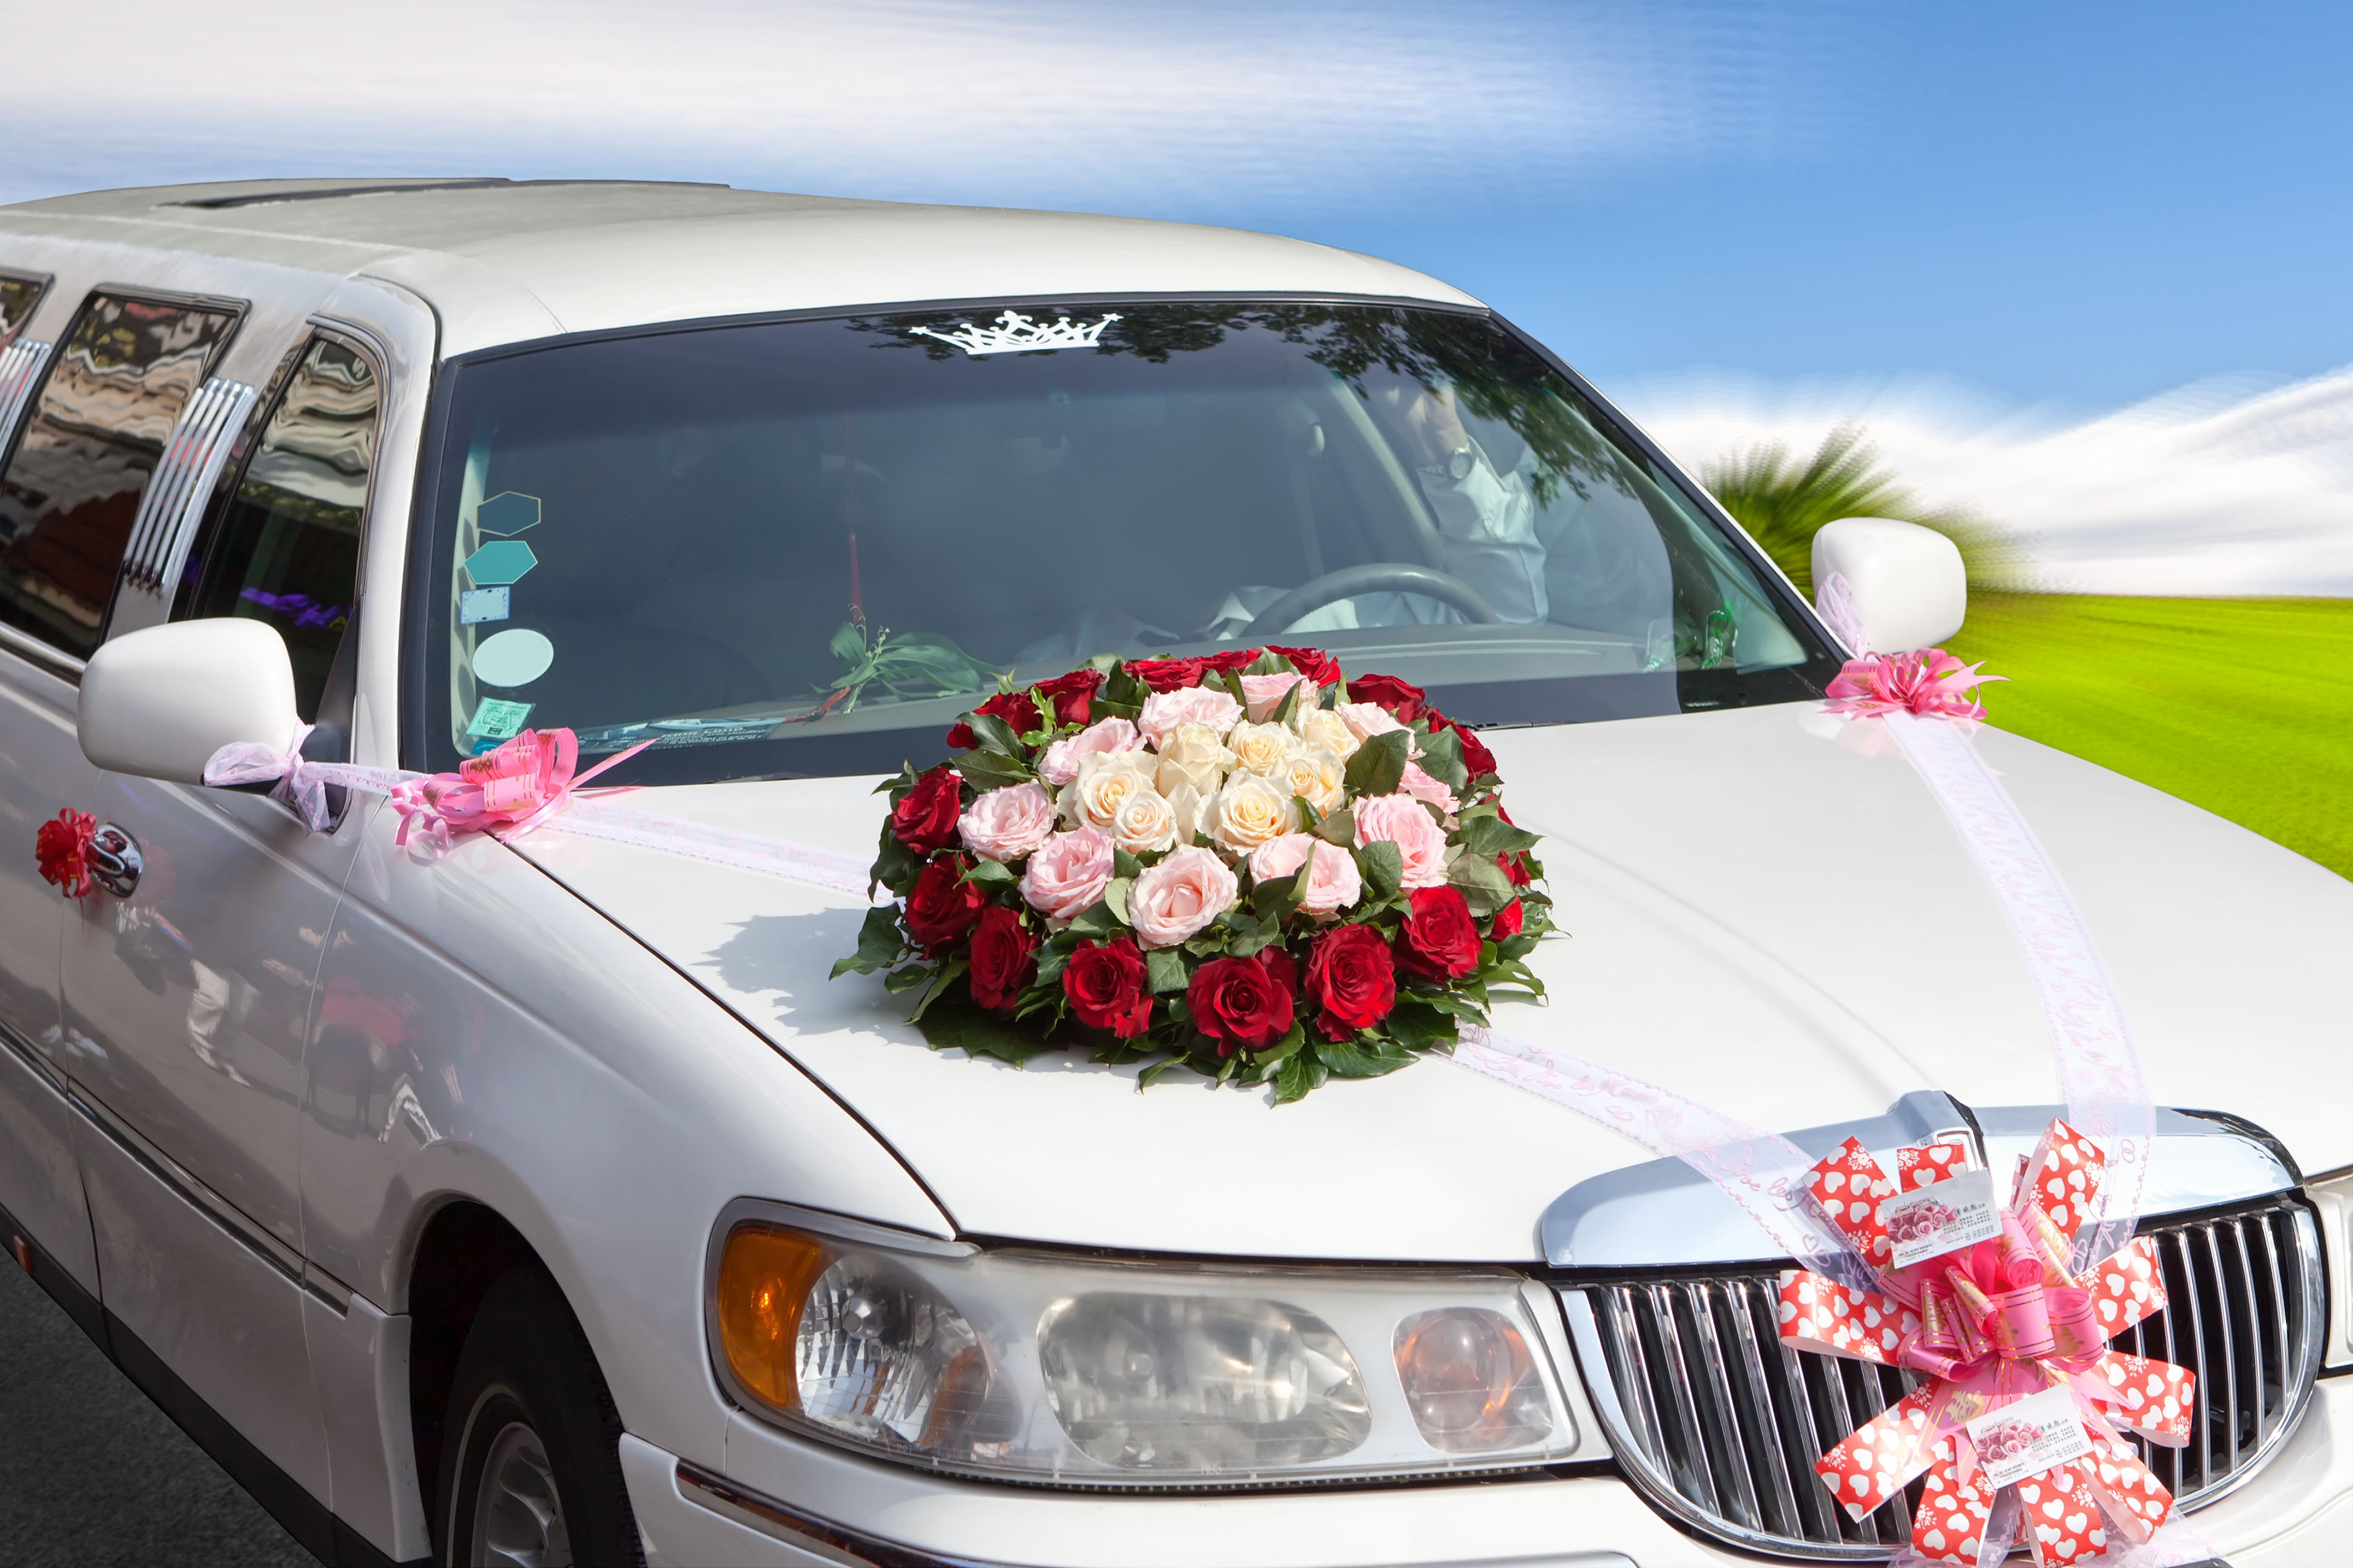 When to book your wedding car? - Articles - Easy Weddings